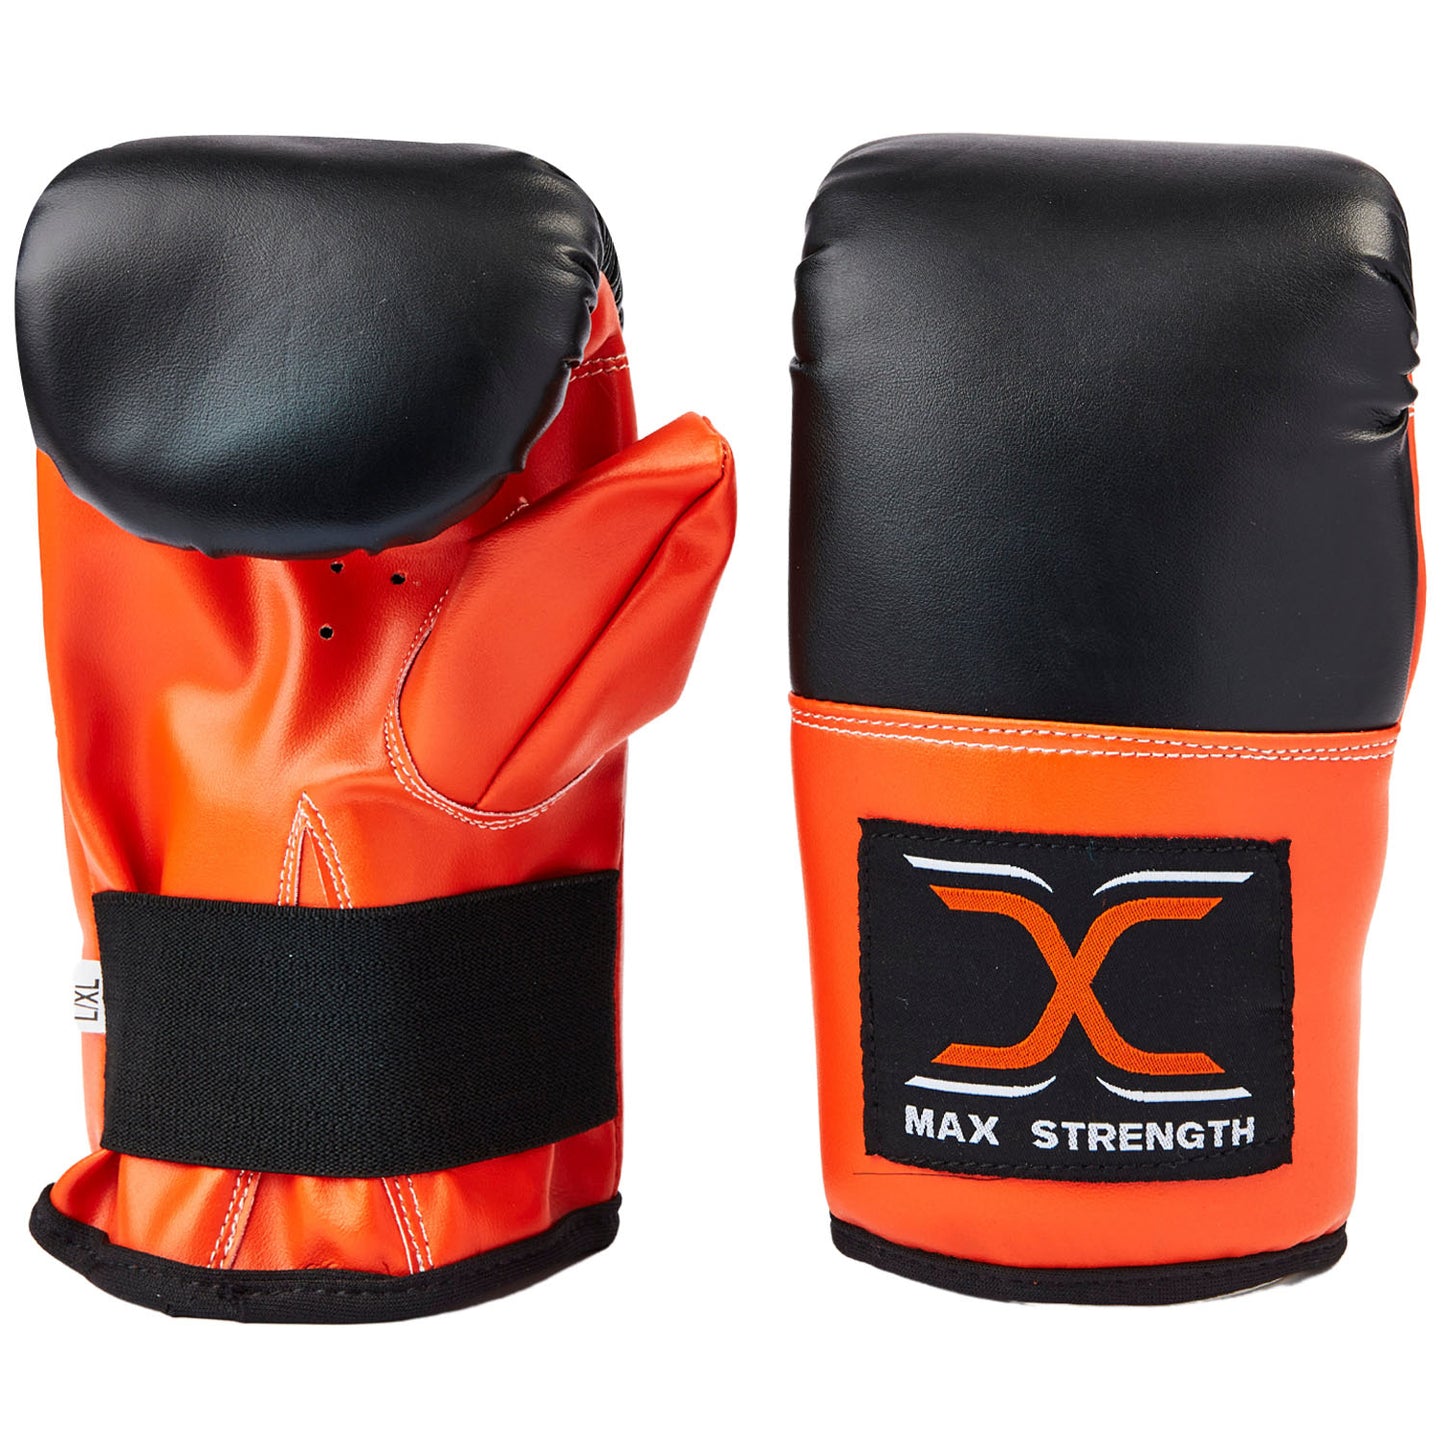 Heavy punch Bag Mitts